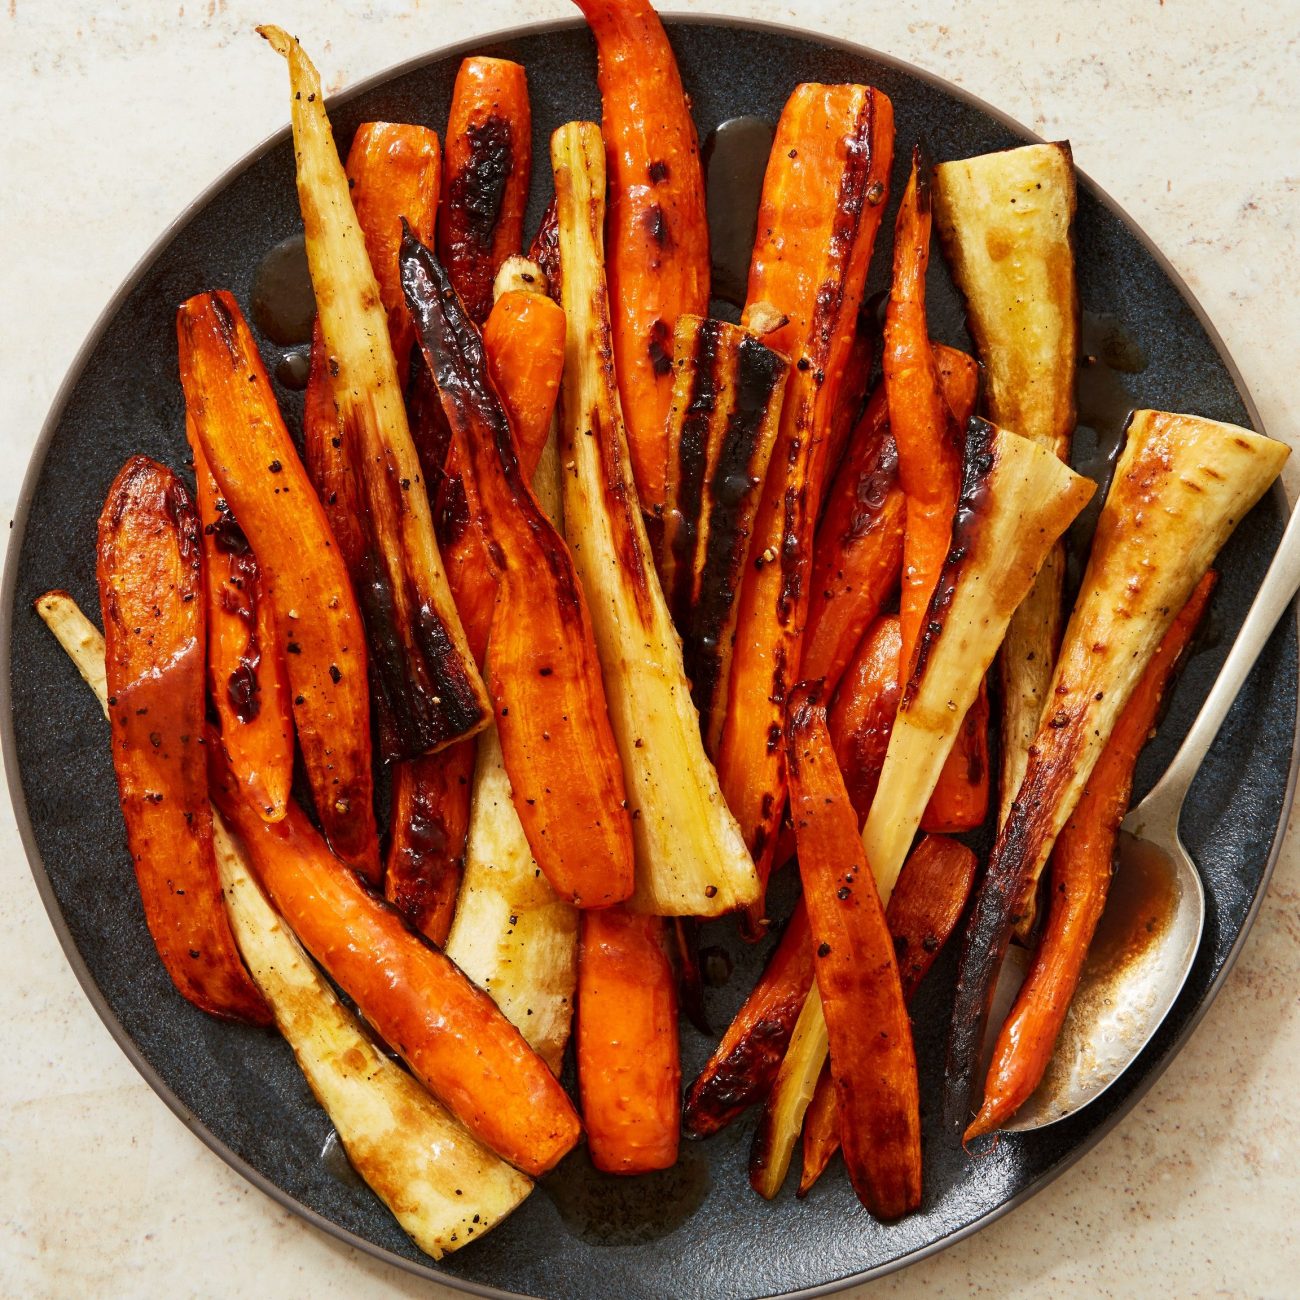 Means Roasted Parsnips & Carrots